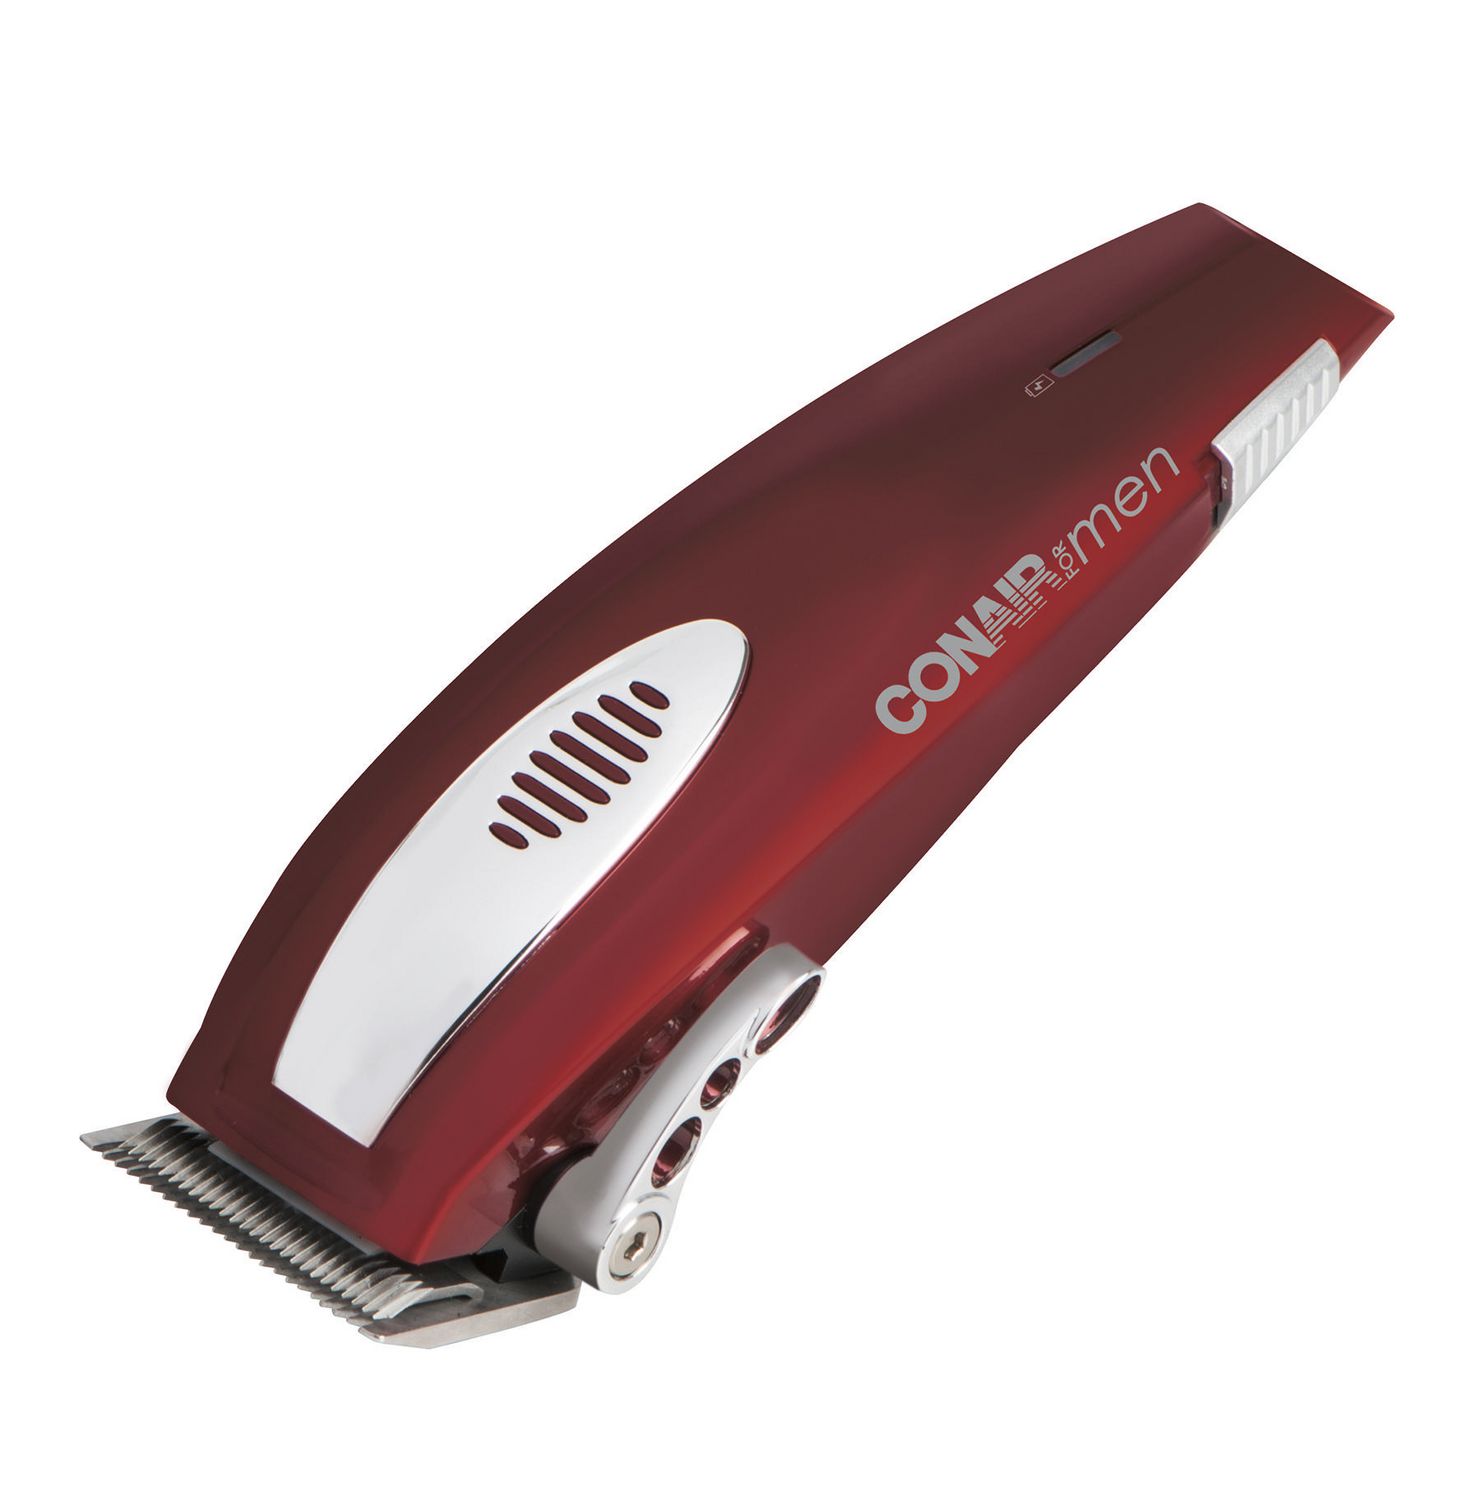 the barber shop pro series by conair